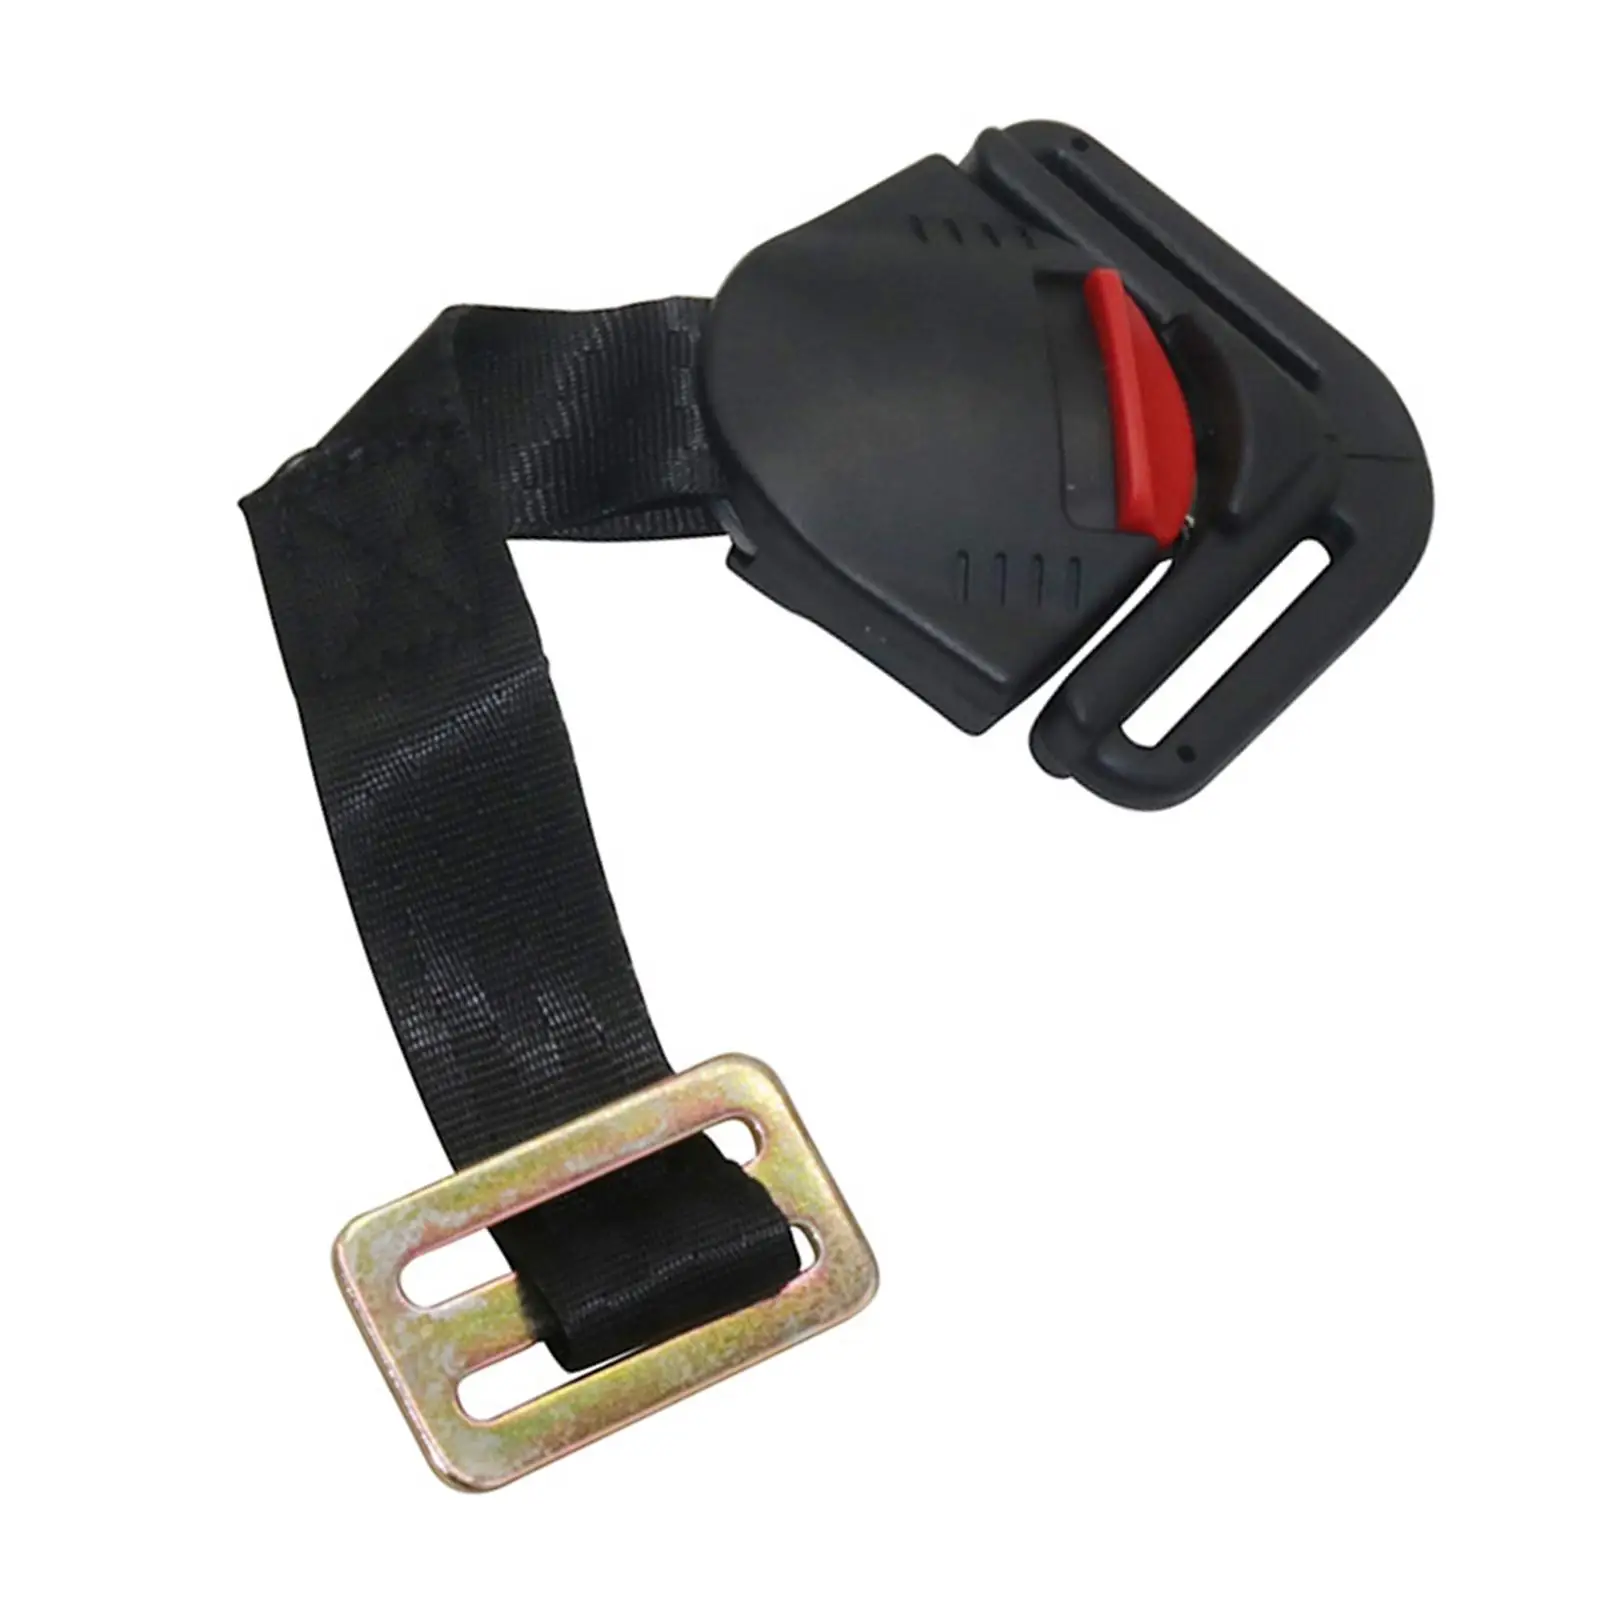 Car Child Seat Safety Belt Buckle Safety Harness Locking Buckle Clip for Stroller